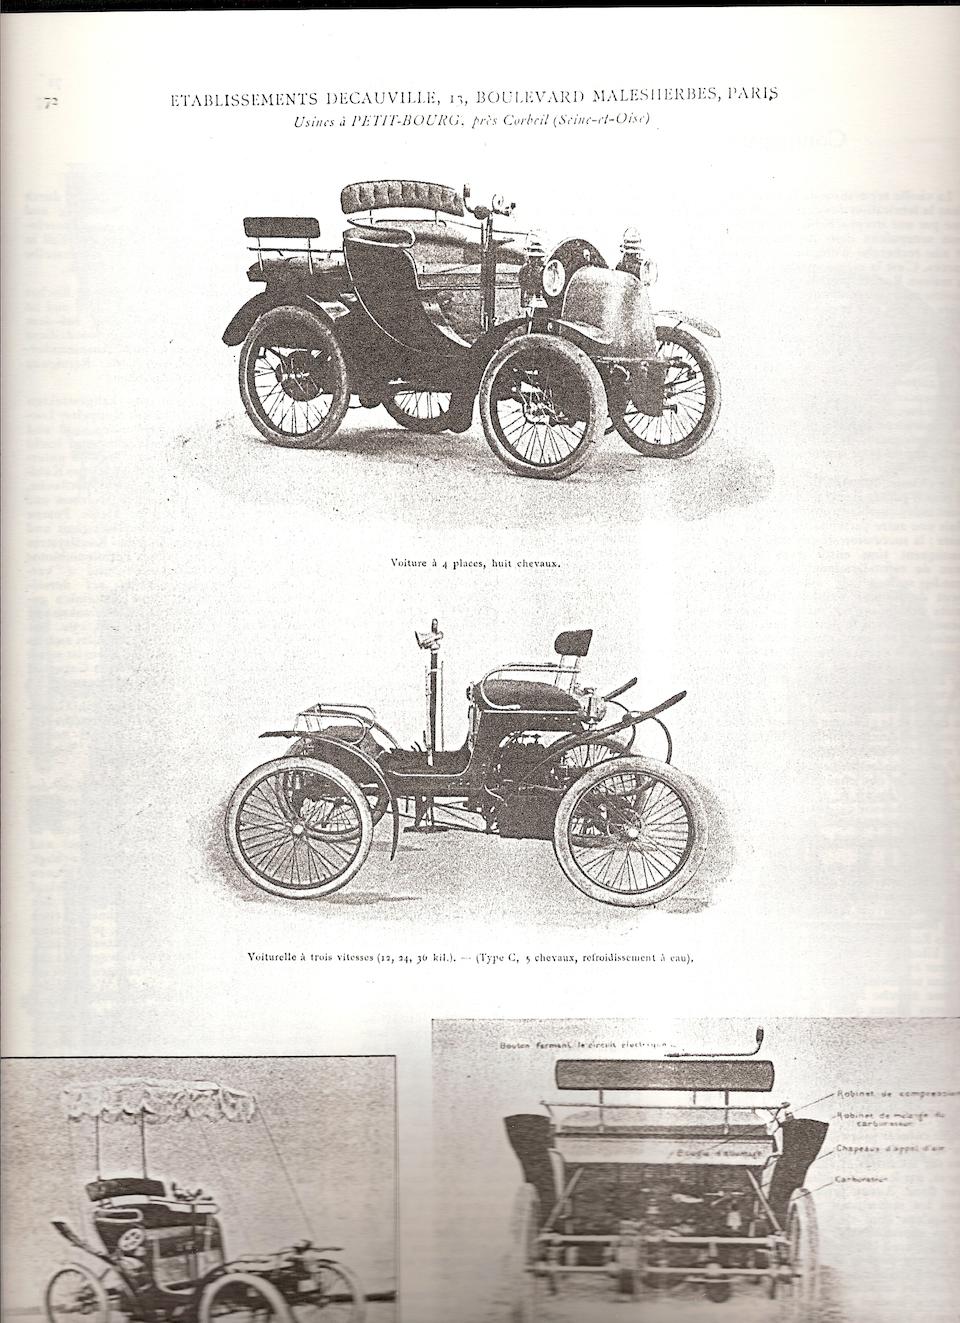 c1899 Decauville 5hp Twin-cylinder Two-seater  Chassis no. 530/639 Engine no. 530/639/11